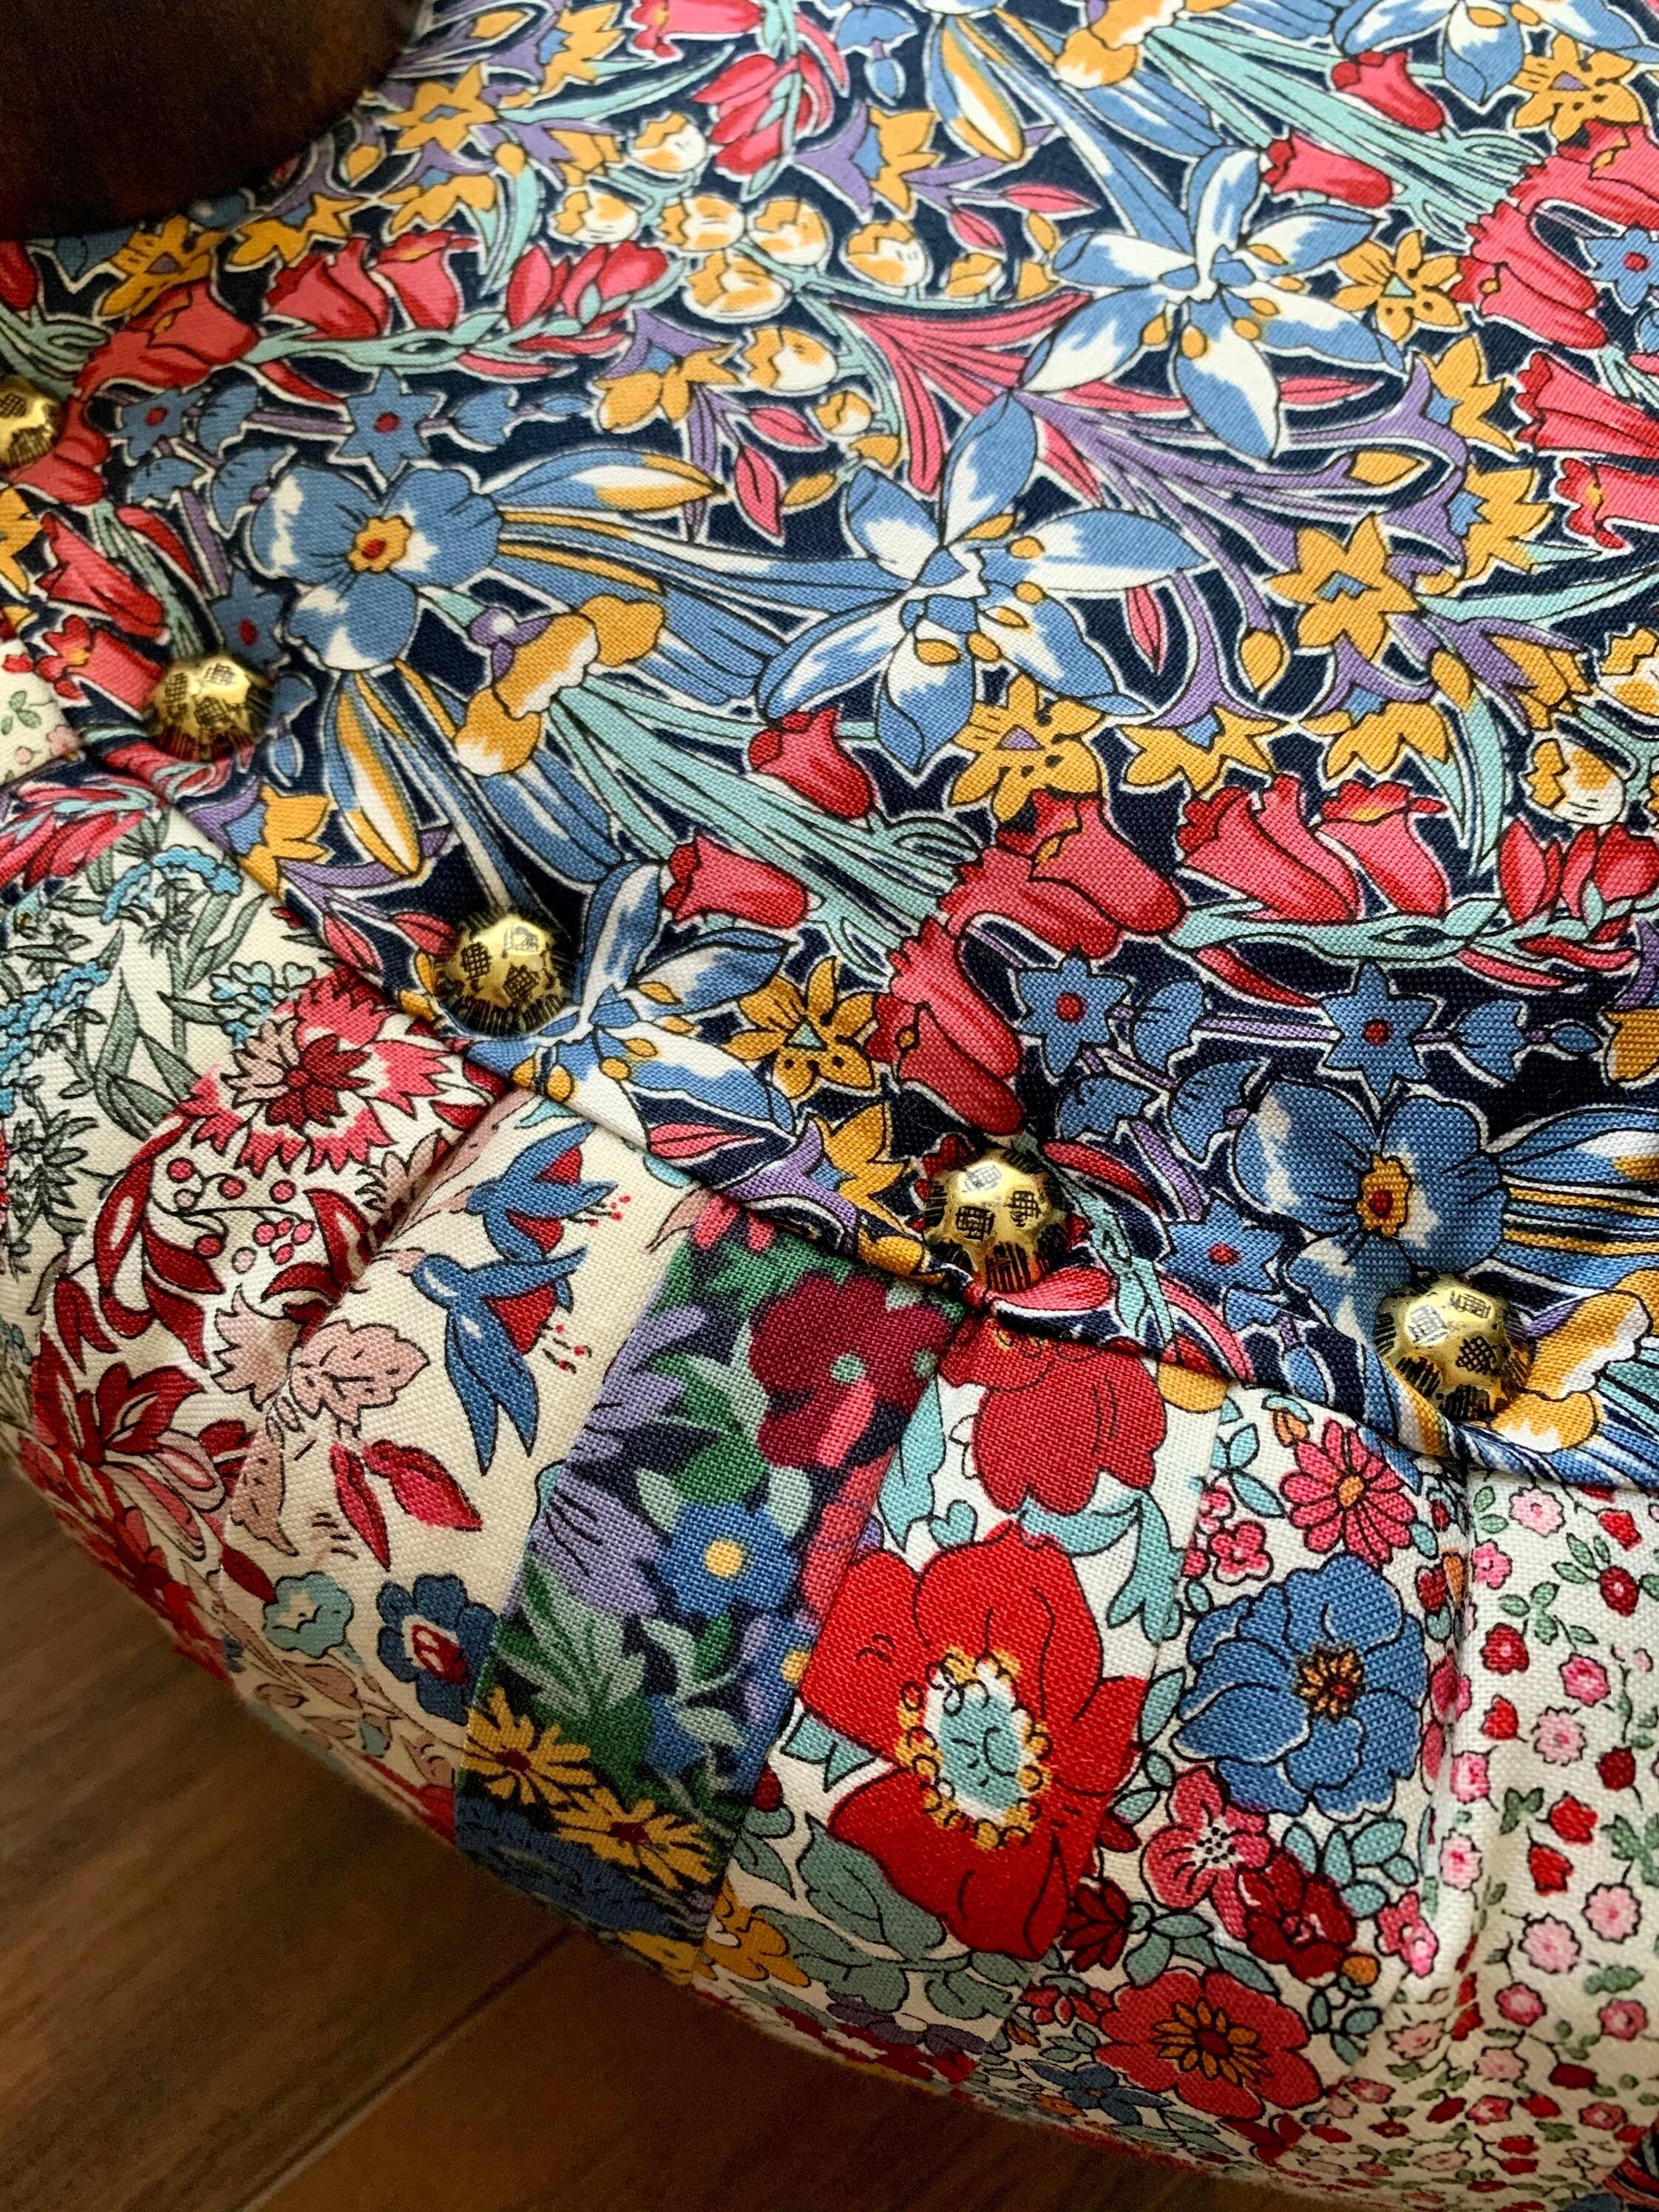 Flower Show Tuffet by Dalgleish Clothworks/ Tuffet Footstool/ | Etsy